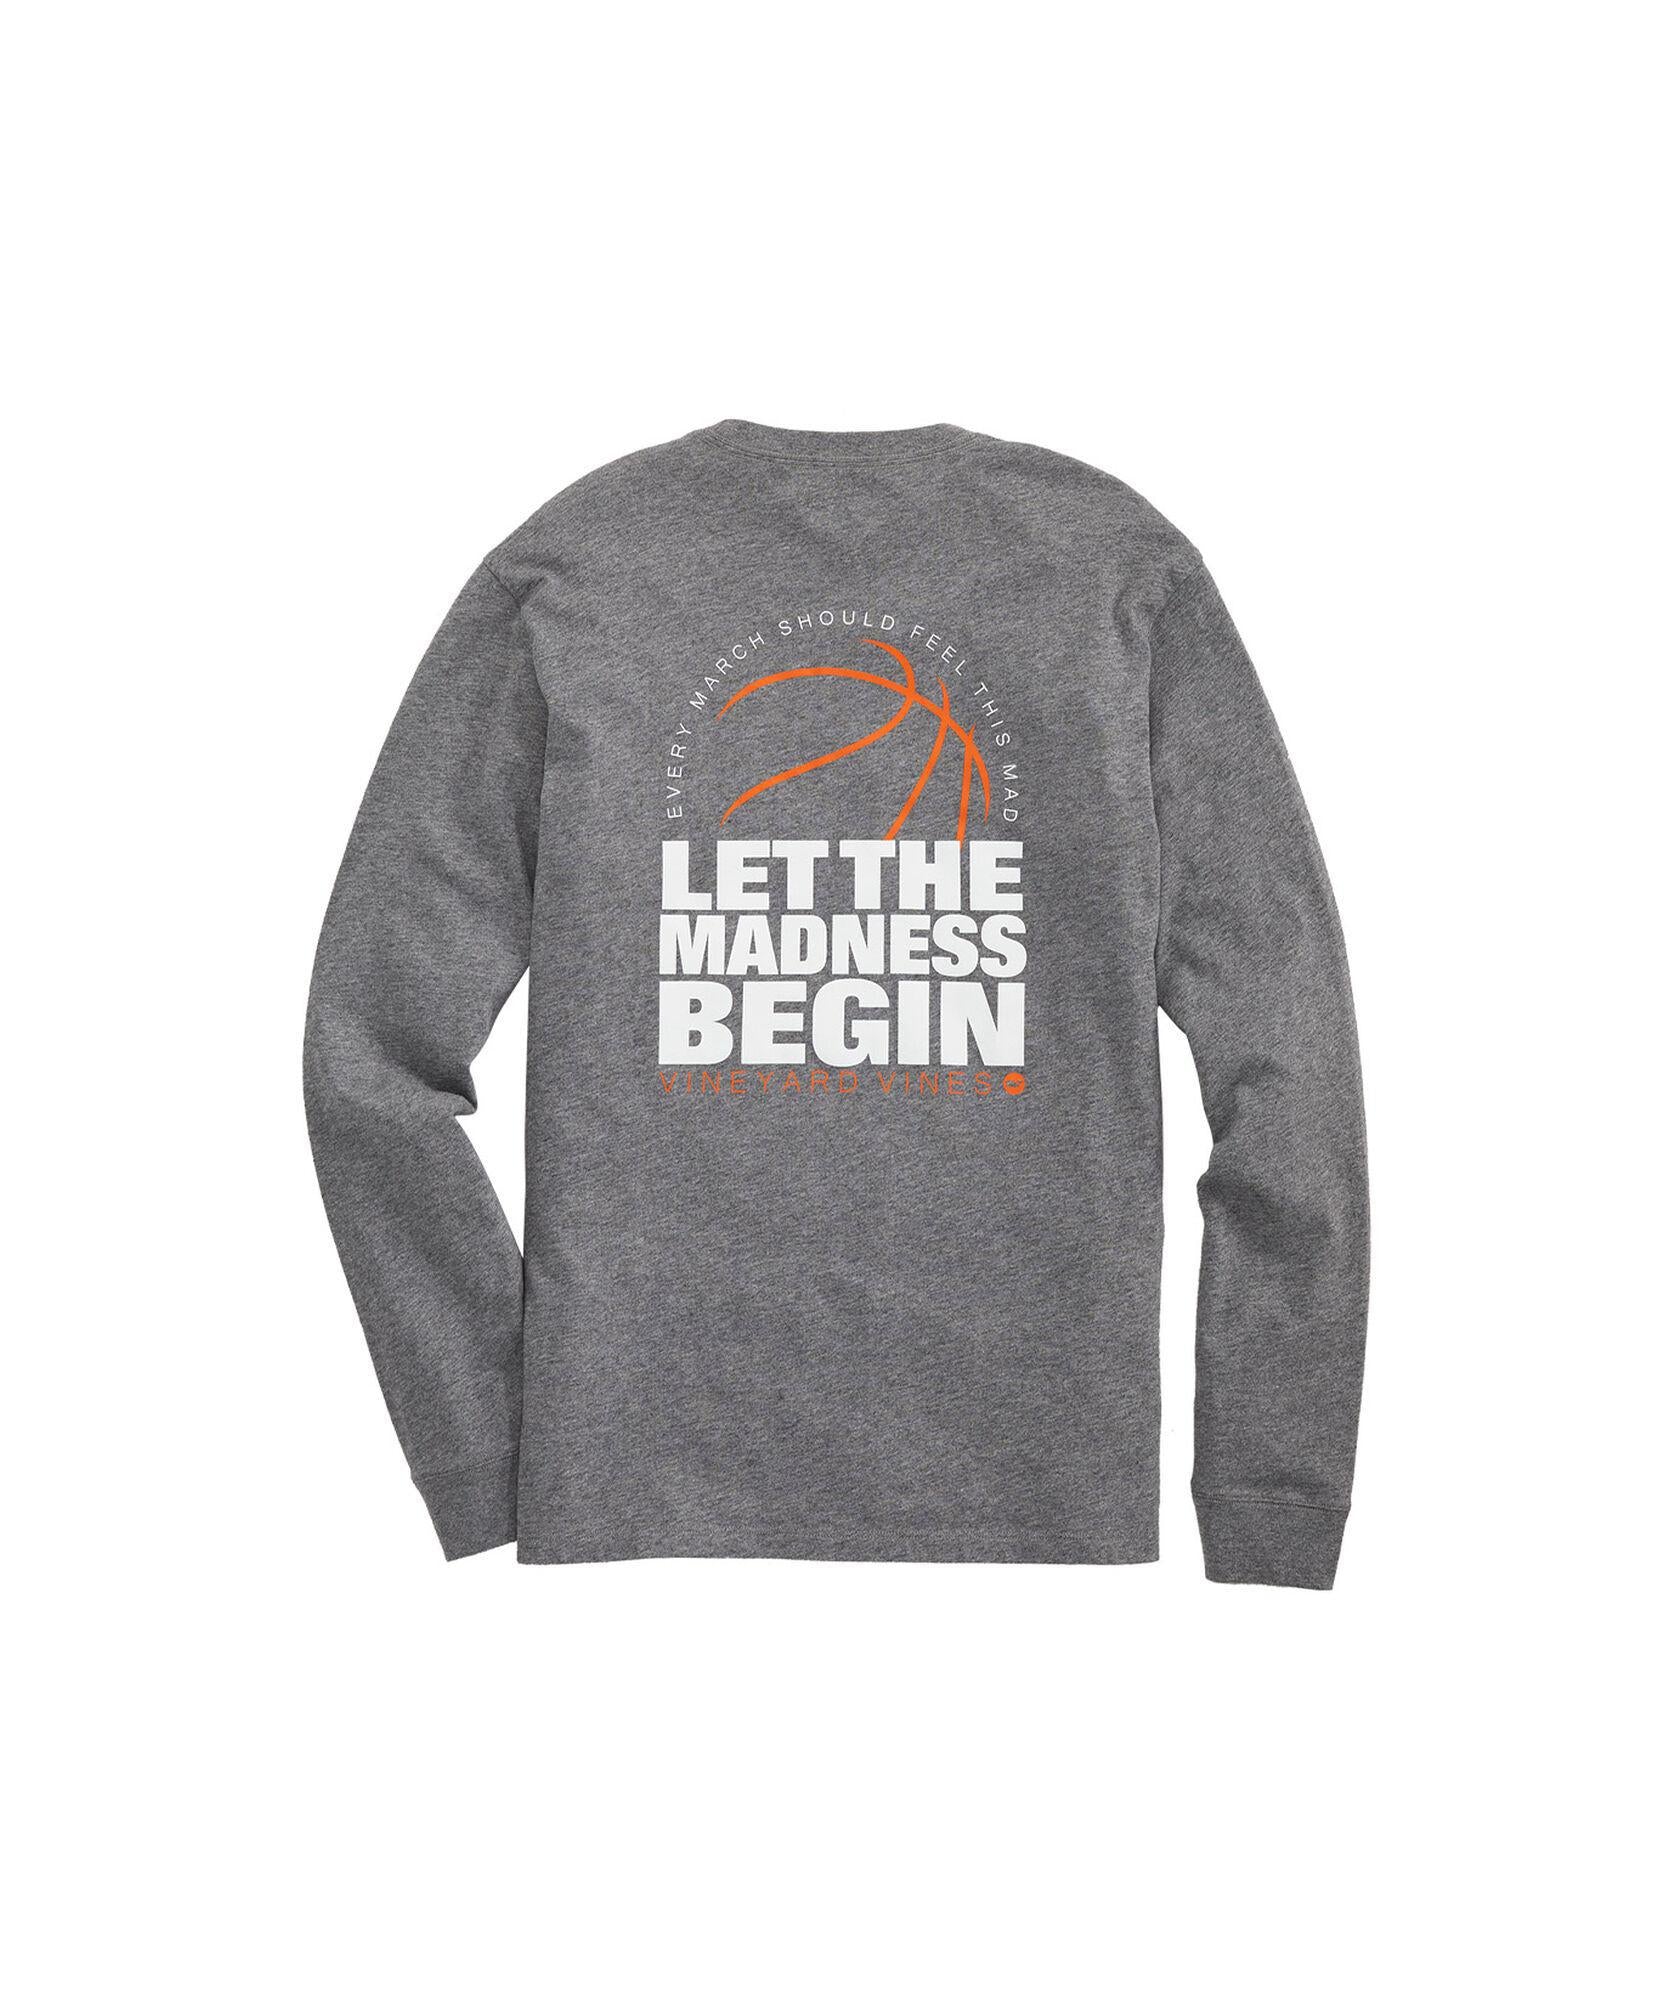 Let The Madness Begin Long-Sleeve Pocket Tee Gray Heather